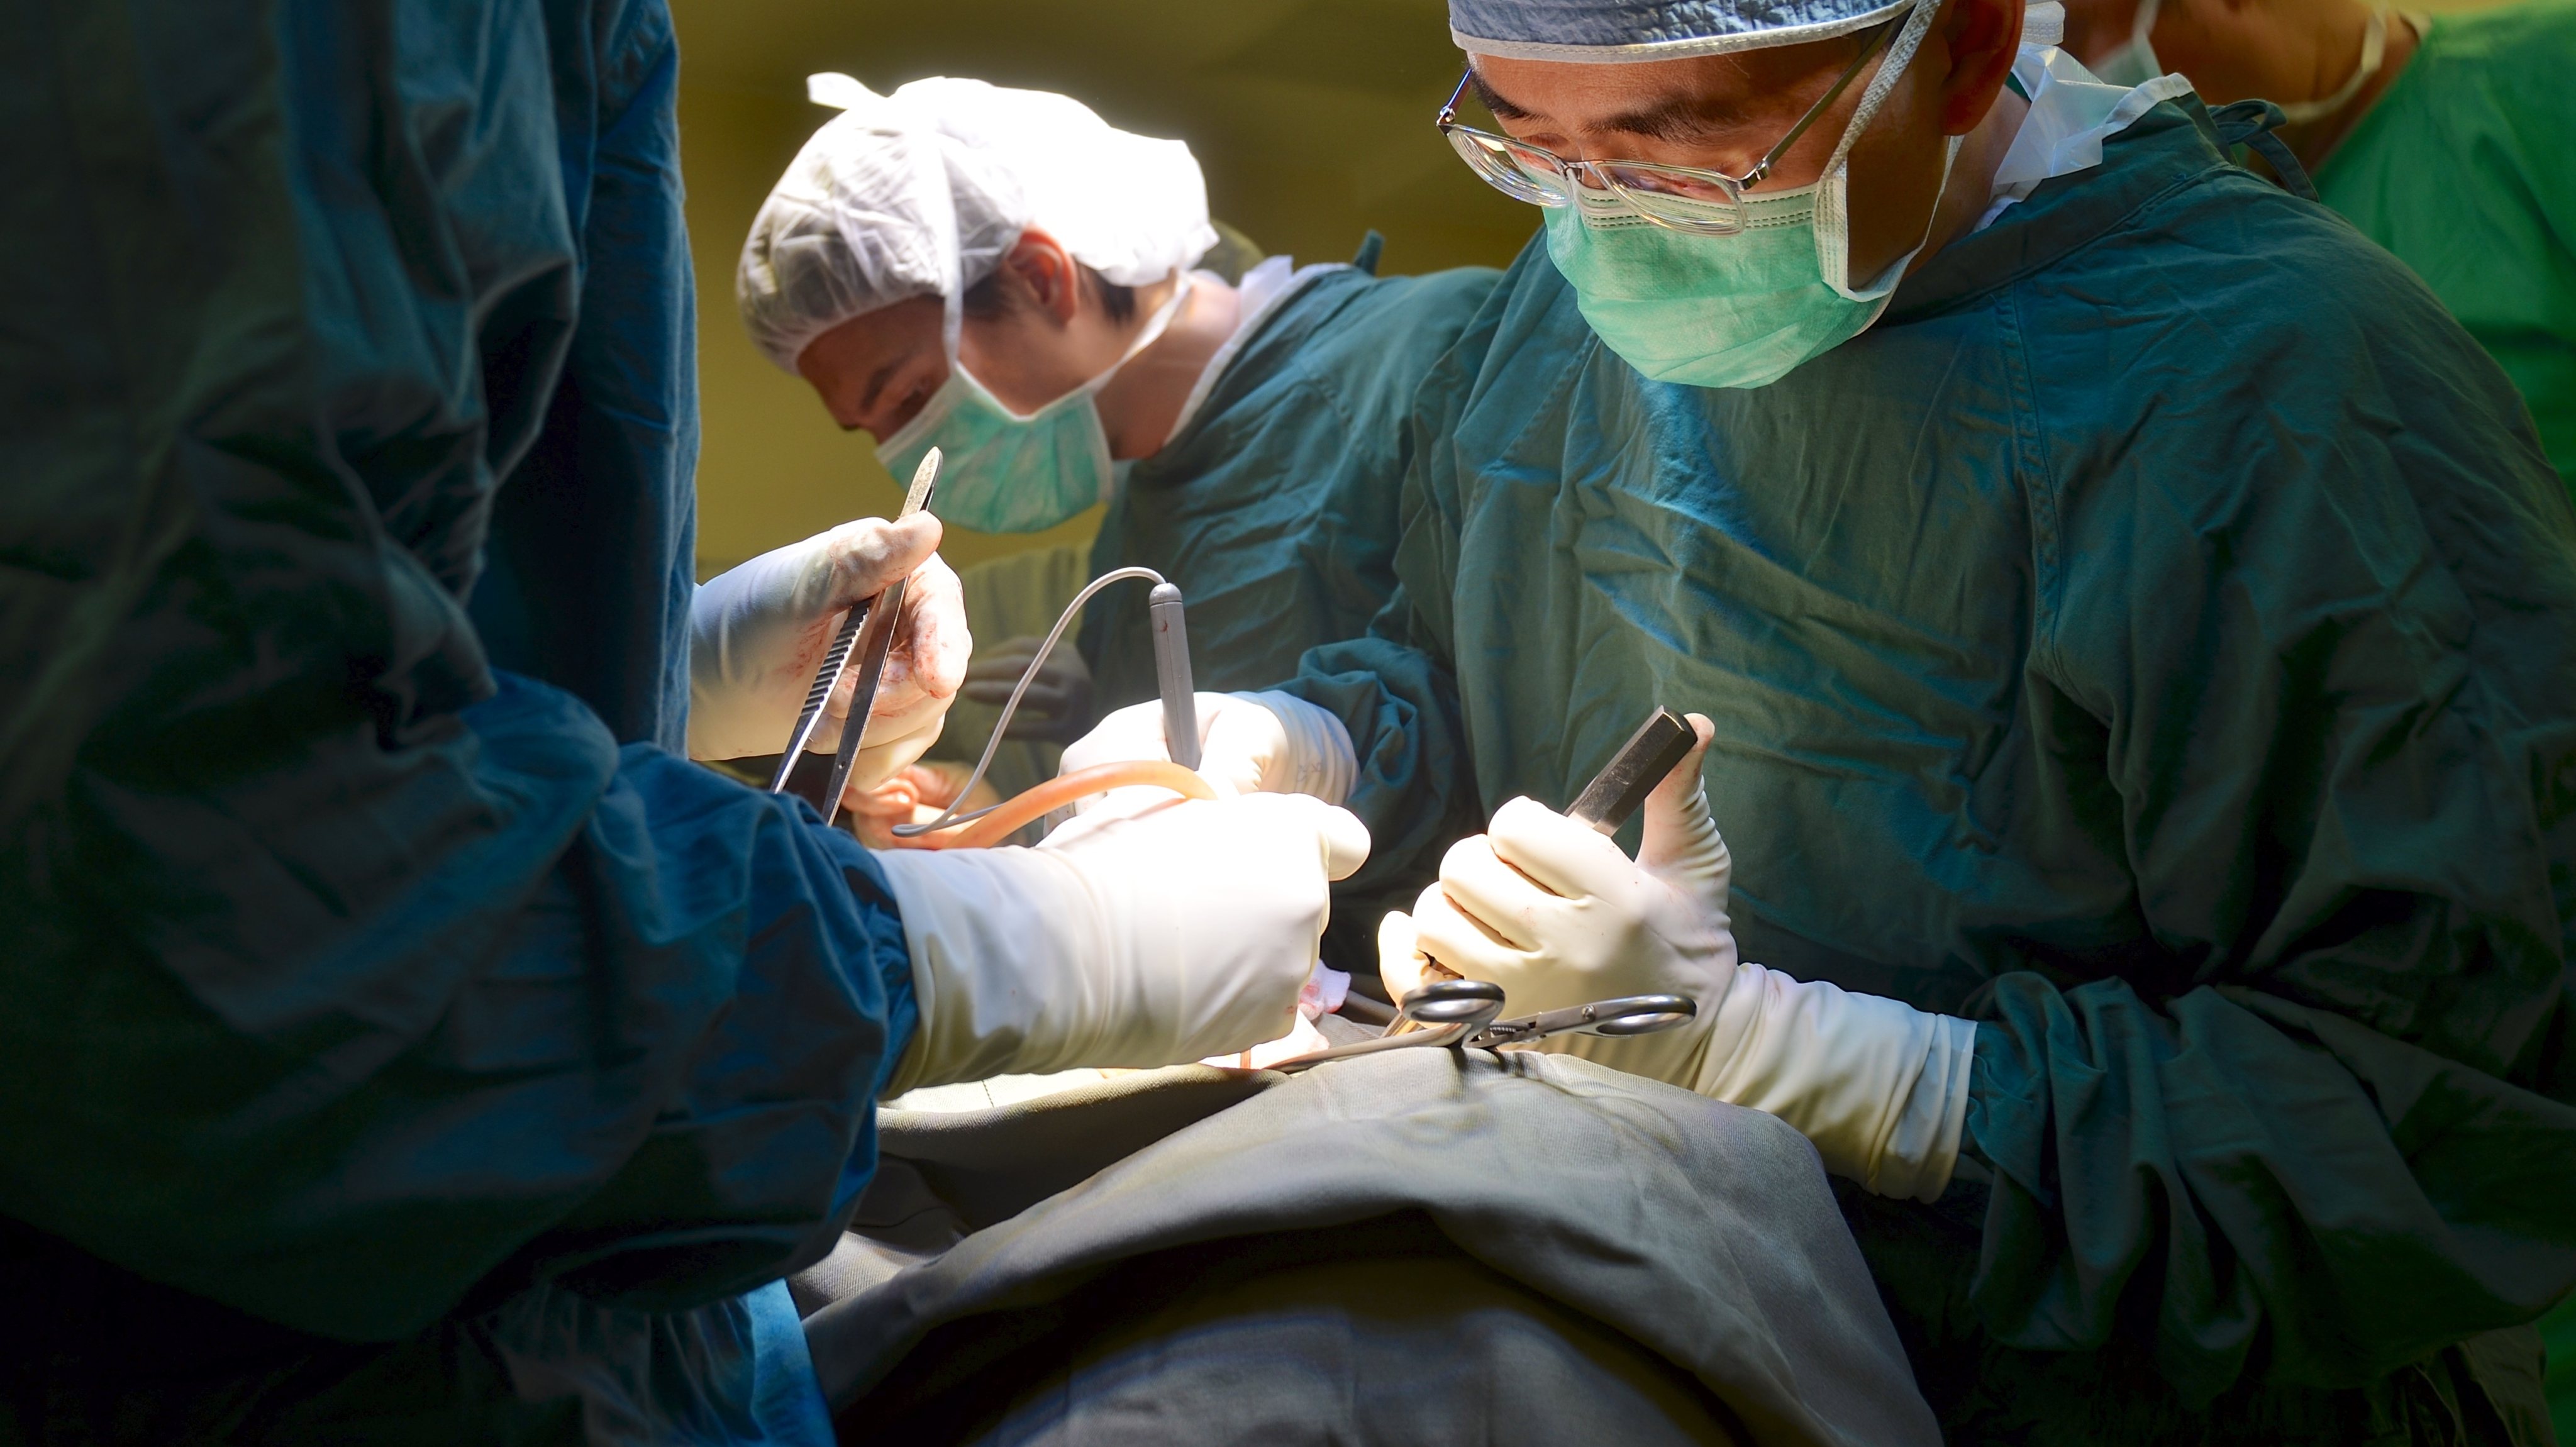 A team of surgeons, headed by Professor Kenneth M.C. Cheung